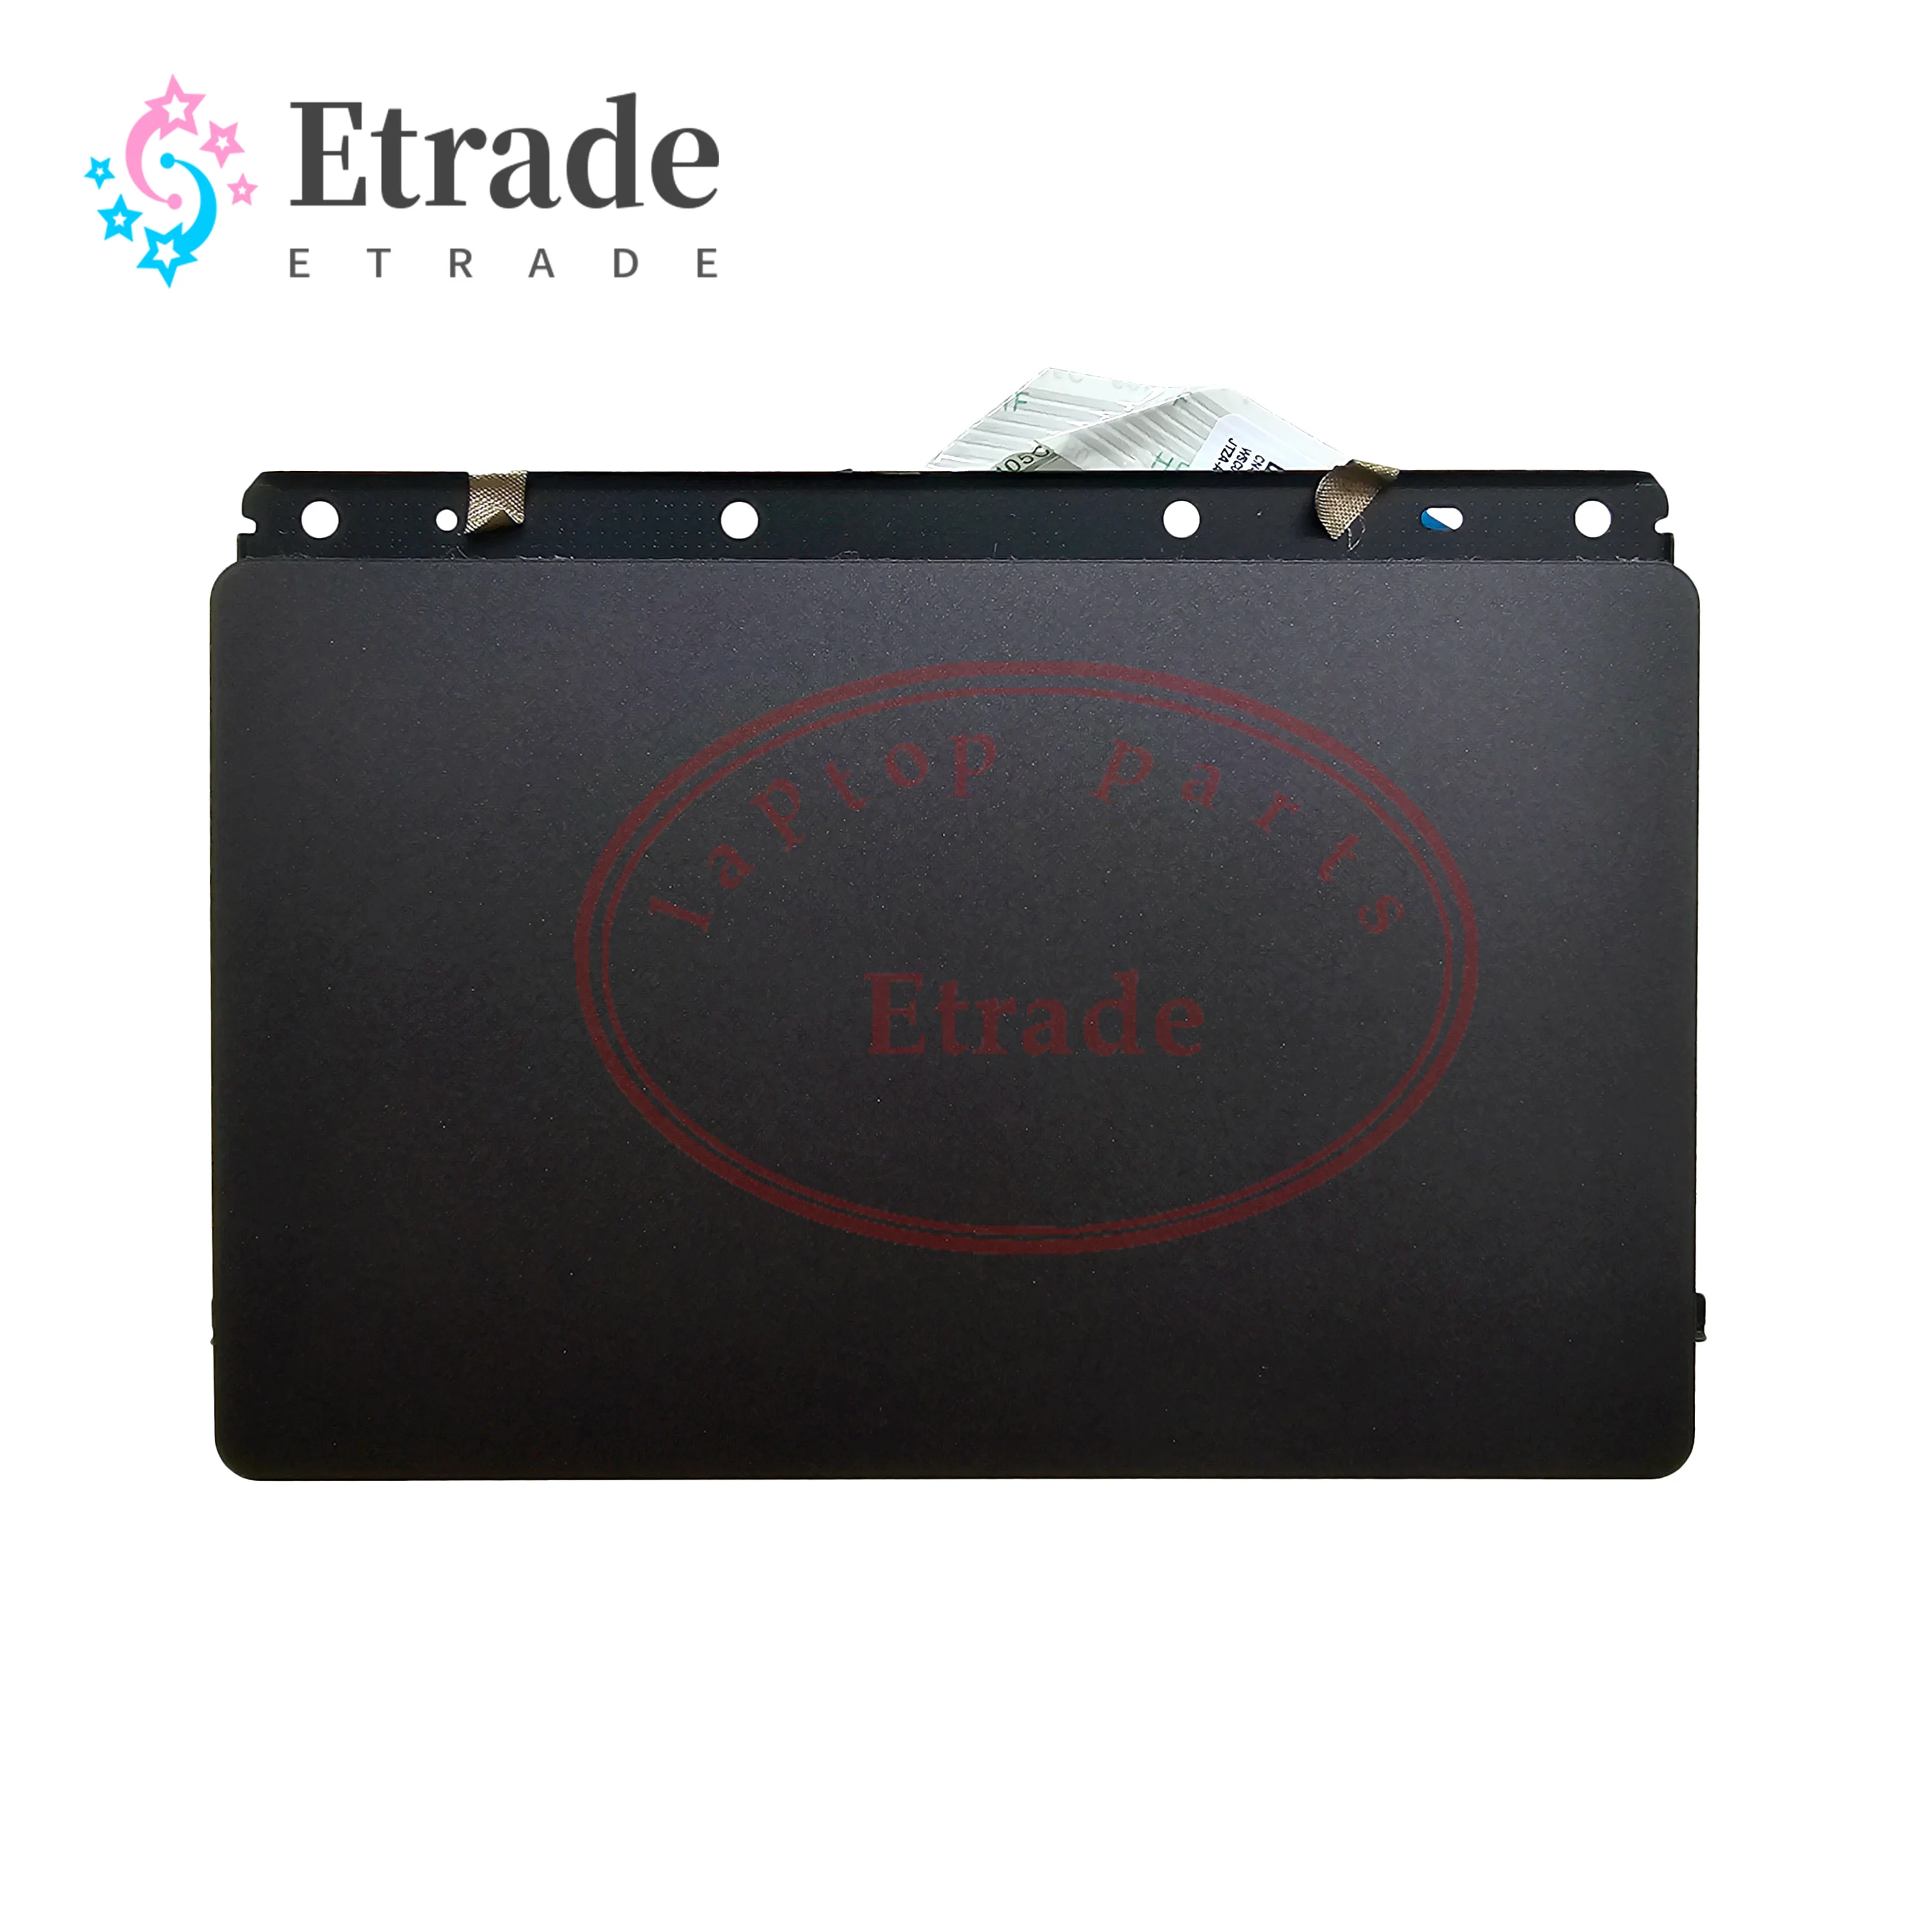 

New Original For Dell Latitude 14 3410 E3410 Series Laptop Touchpad Module Mousepad With Cable HV34D 0HV34D